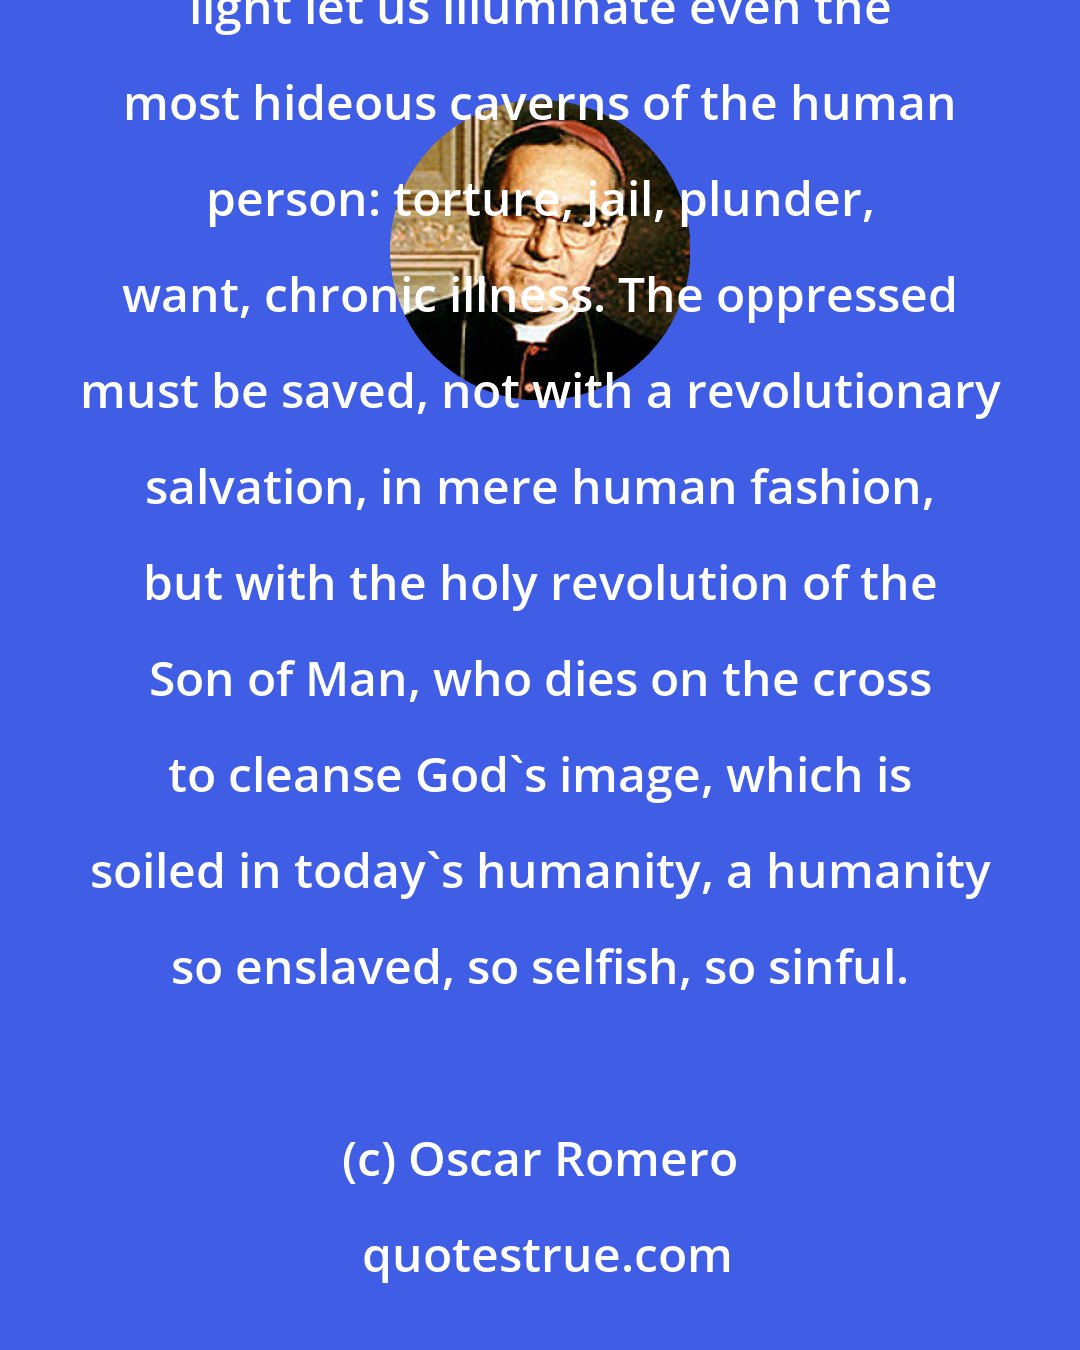 Oscar Romero: Let us be today's Christians. Let us not take fright at the boldness of today's church. With Christ's light let us illuminate even the most hideous caverns of the human person: torture, jail, plunder, want, chronic illness. The oppressed must be saved, not with a revolutionary salvation, in mere human fashion, but with the holy revolution of the Son of Man, who dies on the cross to cleanse God's image, which is soiled in today's humanity, a humanity so enslaved, so selfish, so sinful.